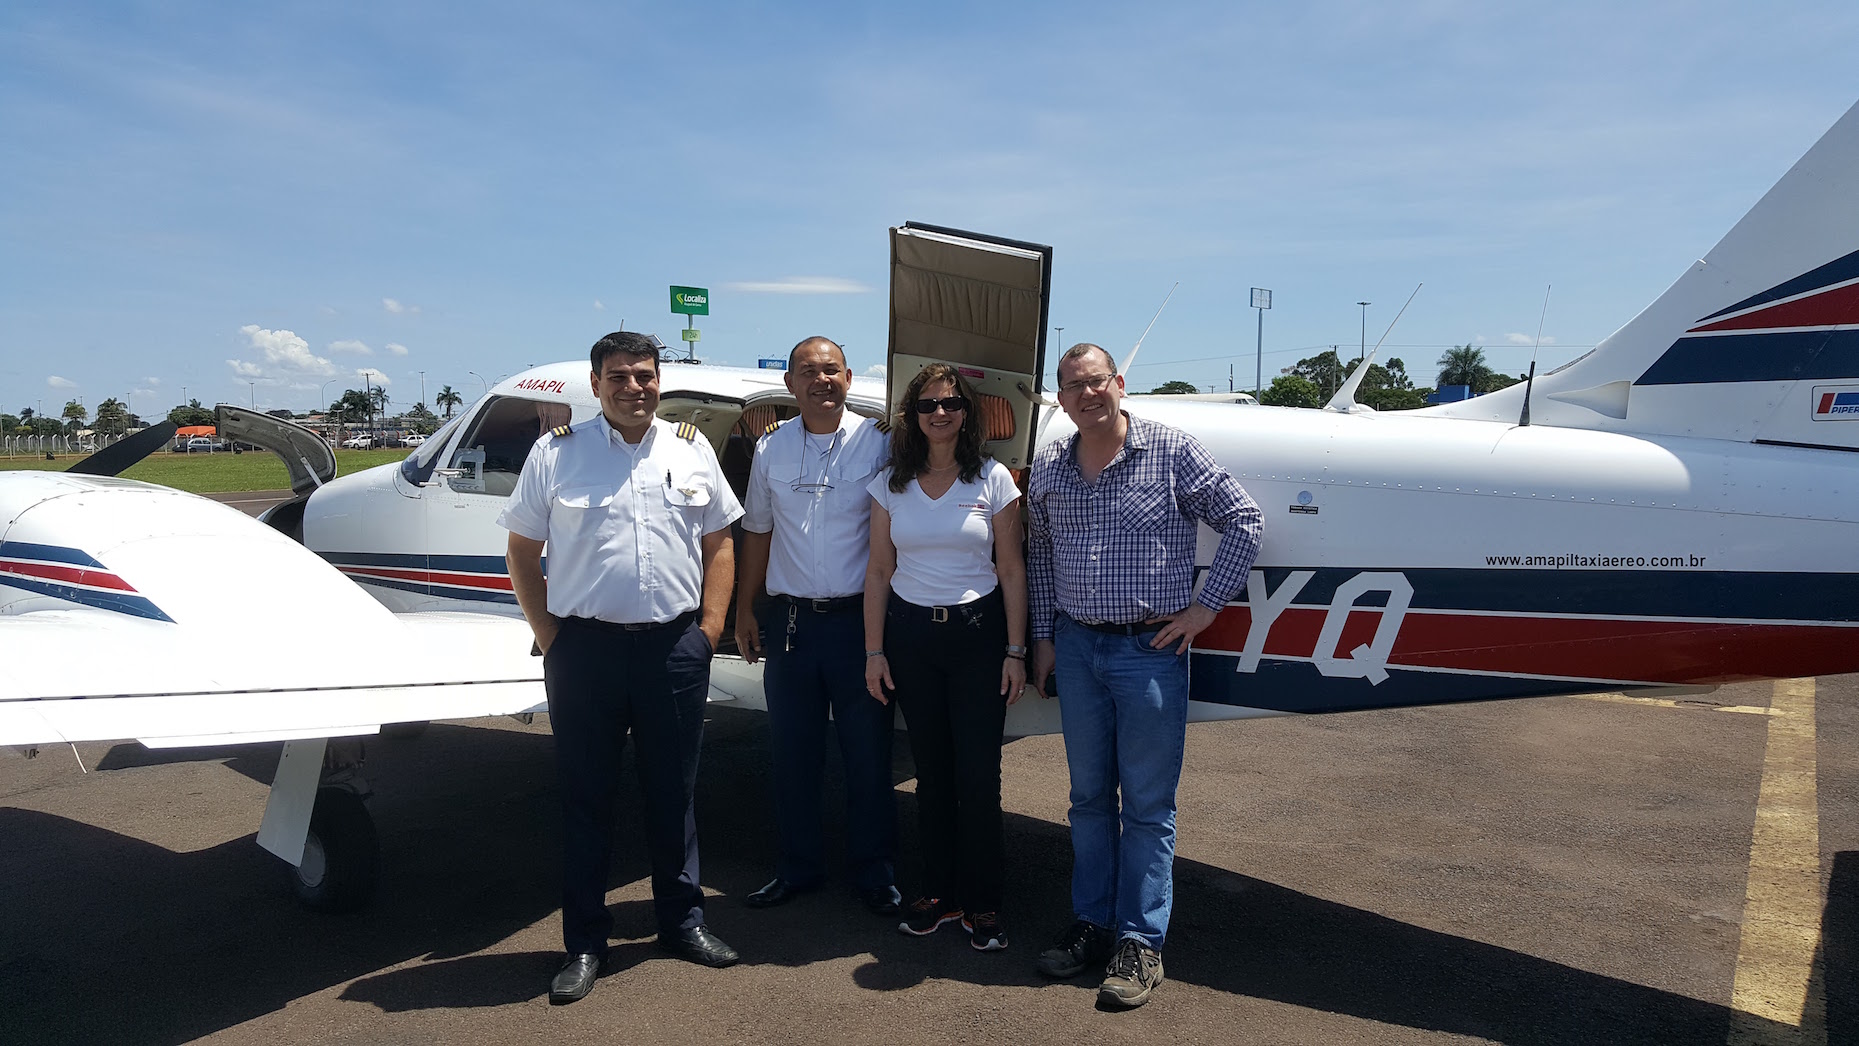 Luciana Gatti and Manuel Gloor with the pilots of the light aircraft